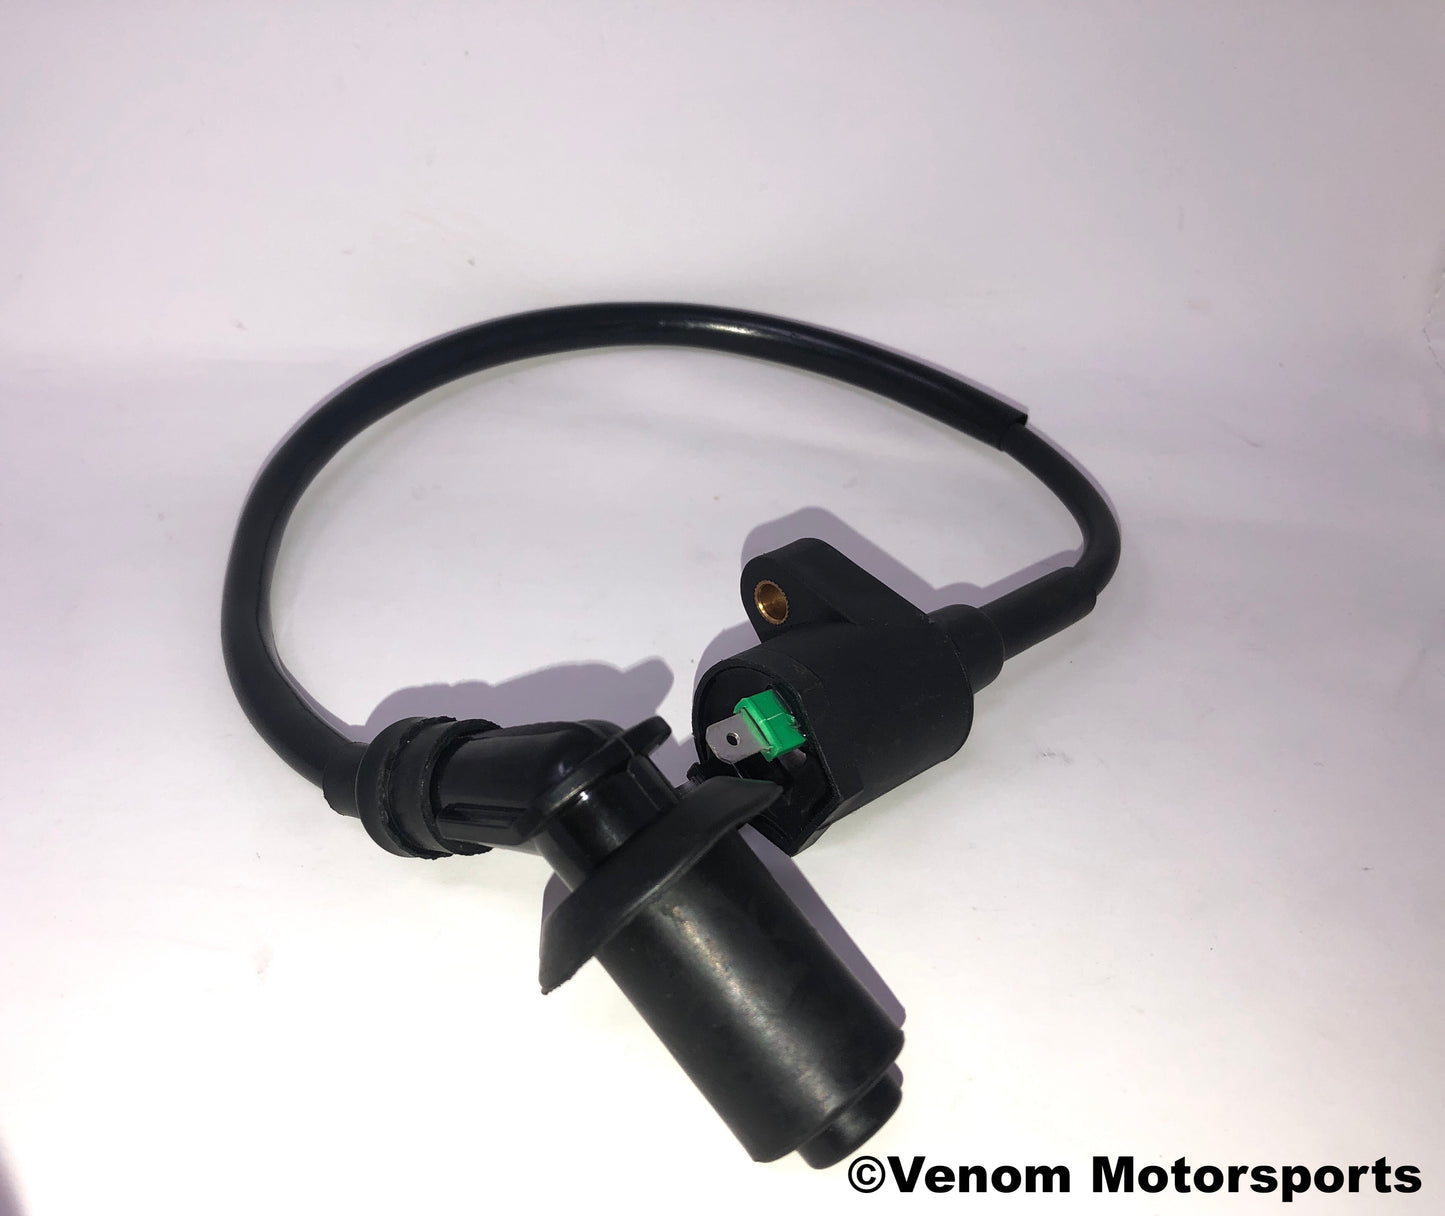 Part # 01020022 ignition coil for DF50SRT. Venom X21 50cc ignition coil for sale. Parts for Dongfang bikes